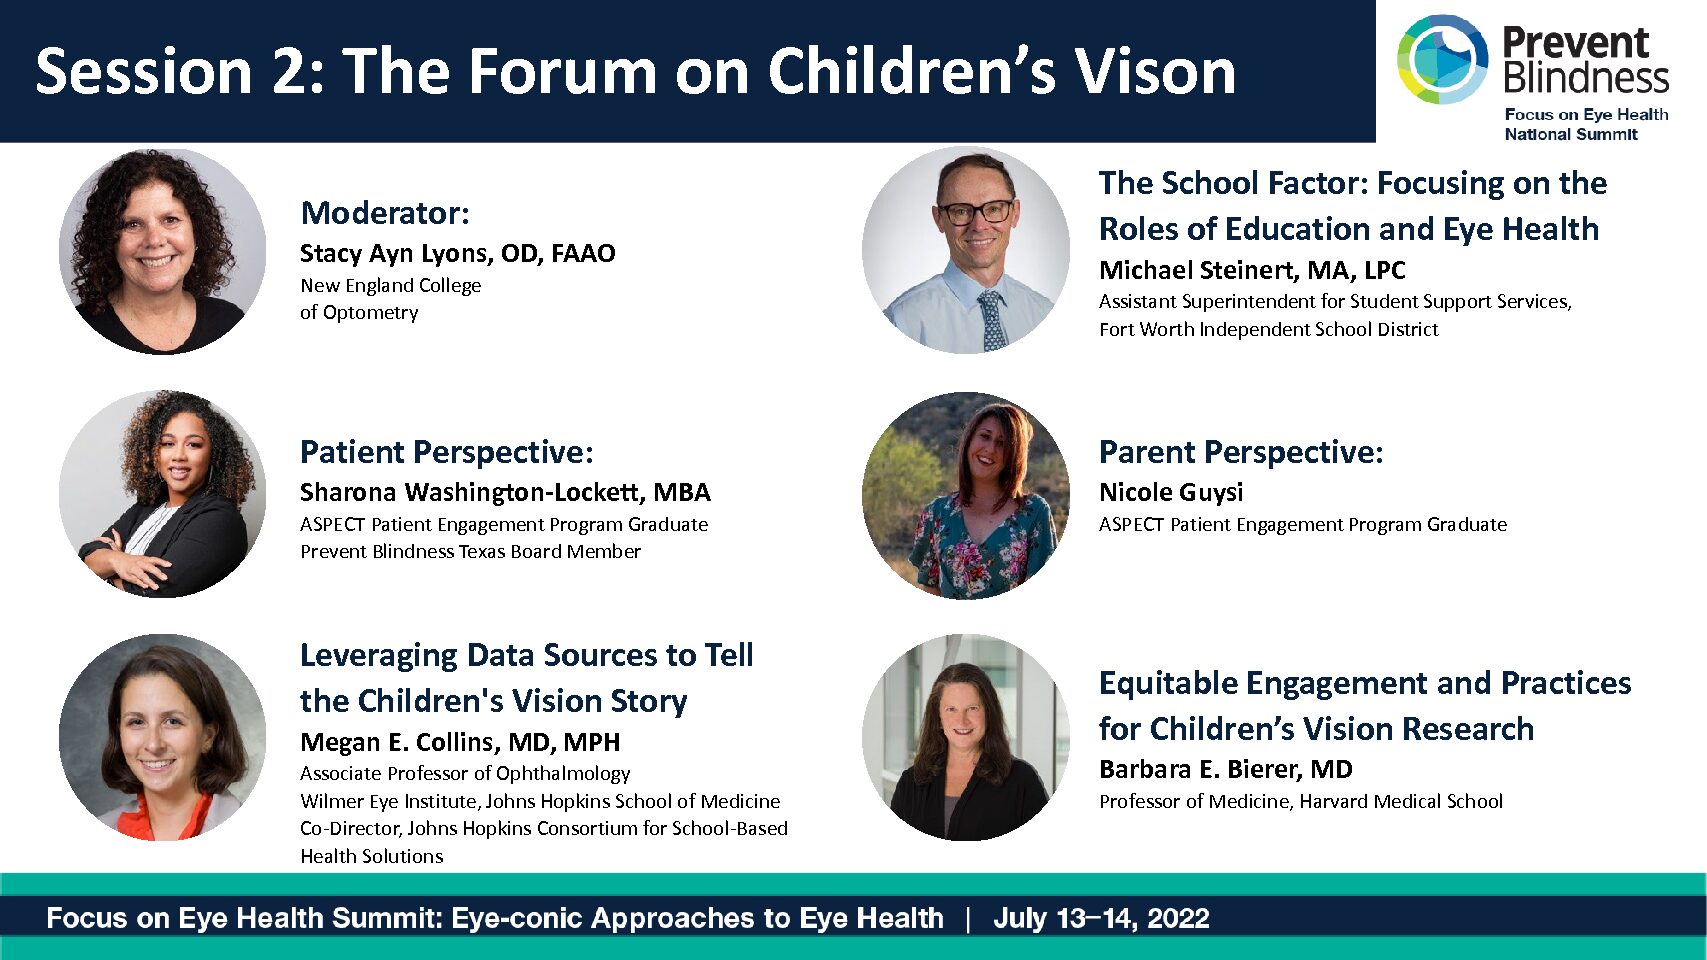 The Forum on Children’s Vision – Patient Perspective